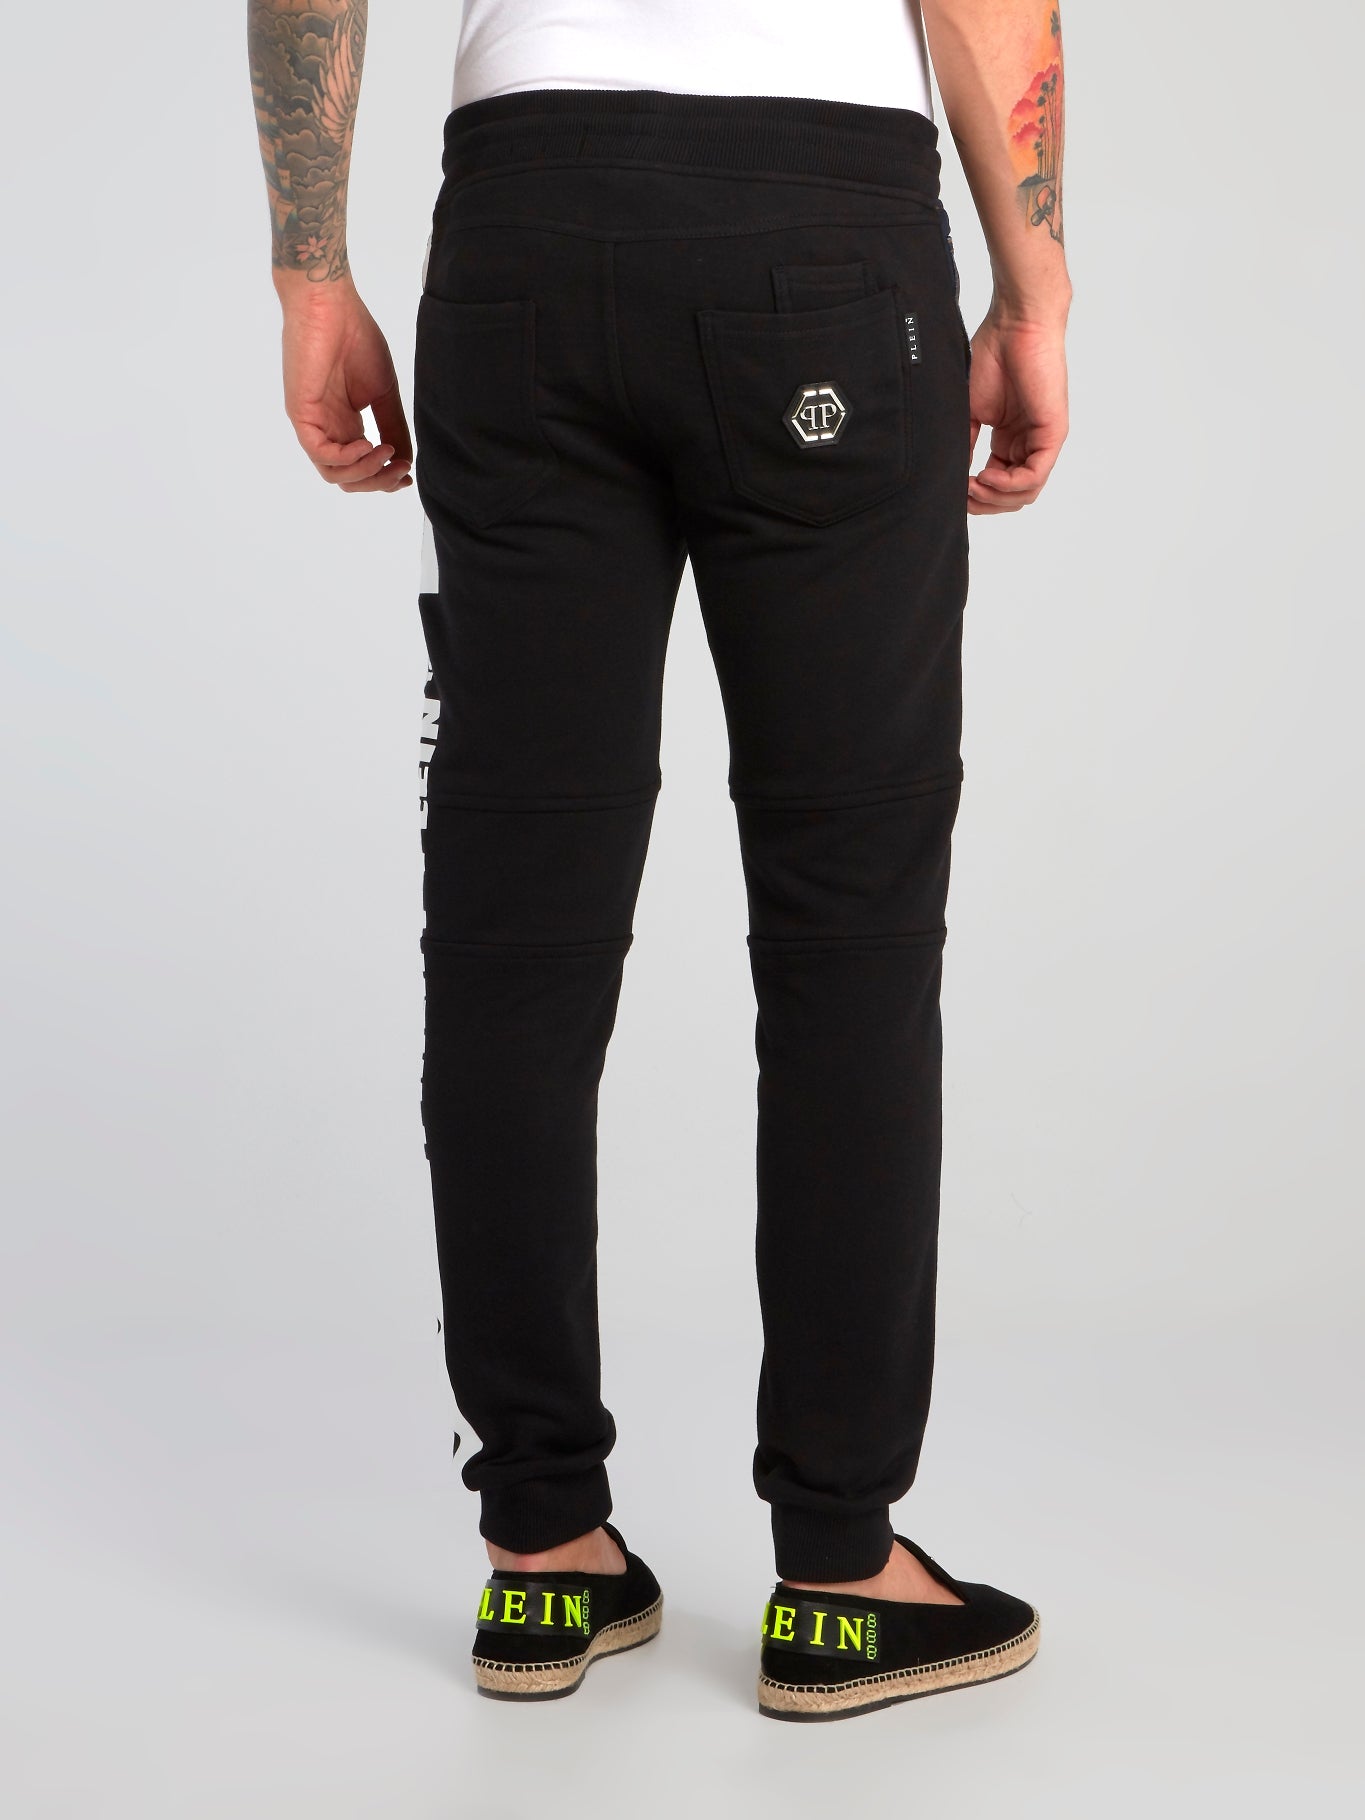 PP1978 Slim Shady Chill Fit Trousers